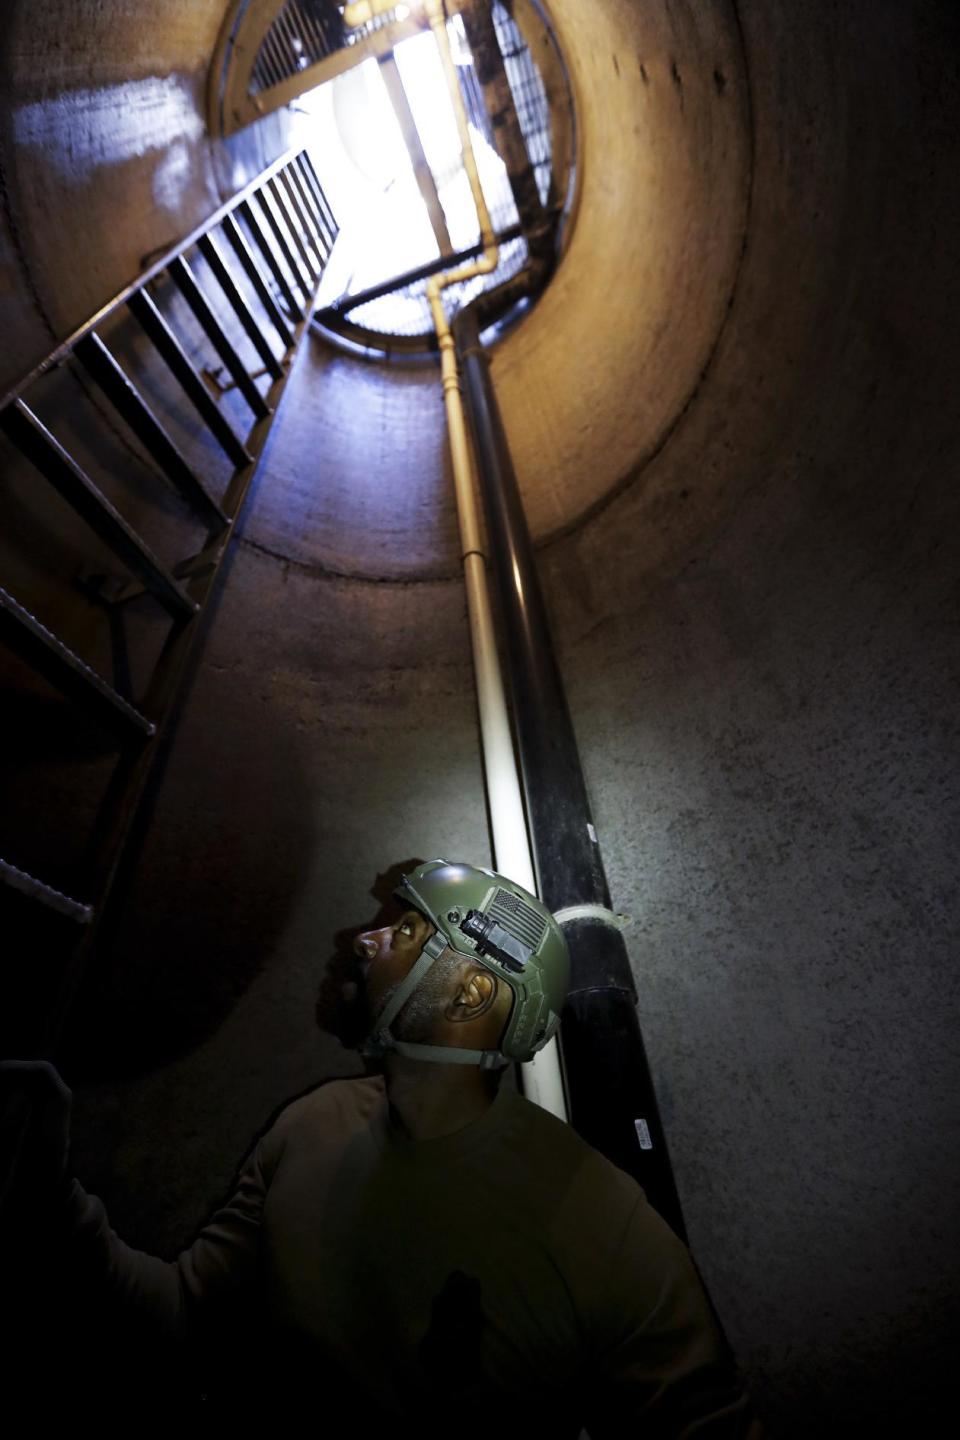 In this March 6, 2017 photo, a member of the Border Patrol's Border Tunnel Entry Team looks up as he descends an entrance carved out by the Border Patrol leading to a tunnel spanning the border between San Diego and Tijuana, Mexico, in San Diego. Authorities have discovered more than 200 cross-border tunnels originating in Mexico since 1990, most of which entered the United States. (AP Photo/Gregory Bull)